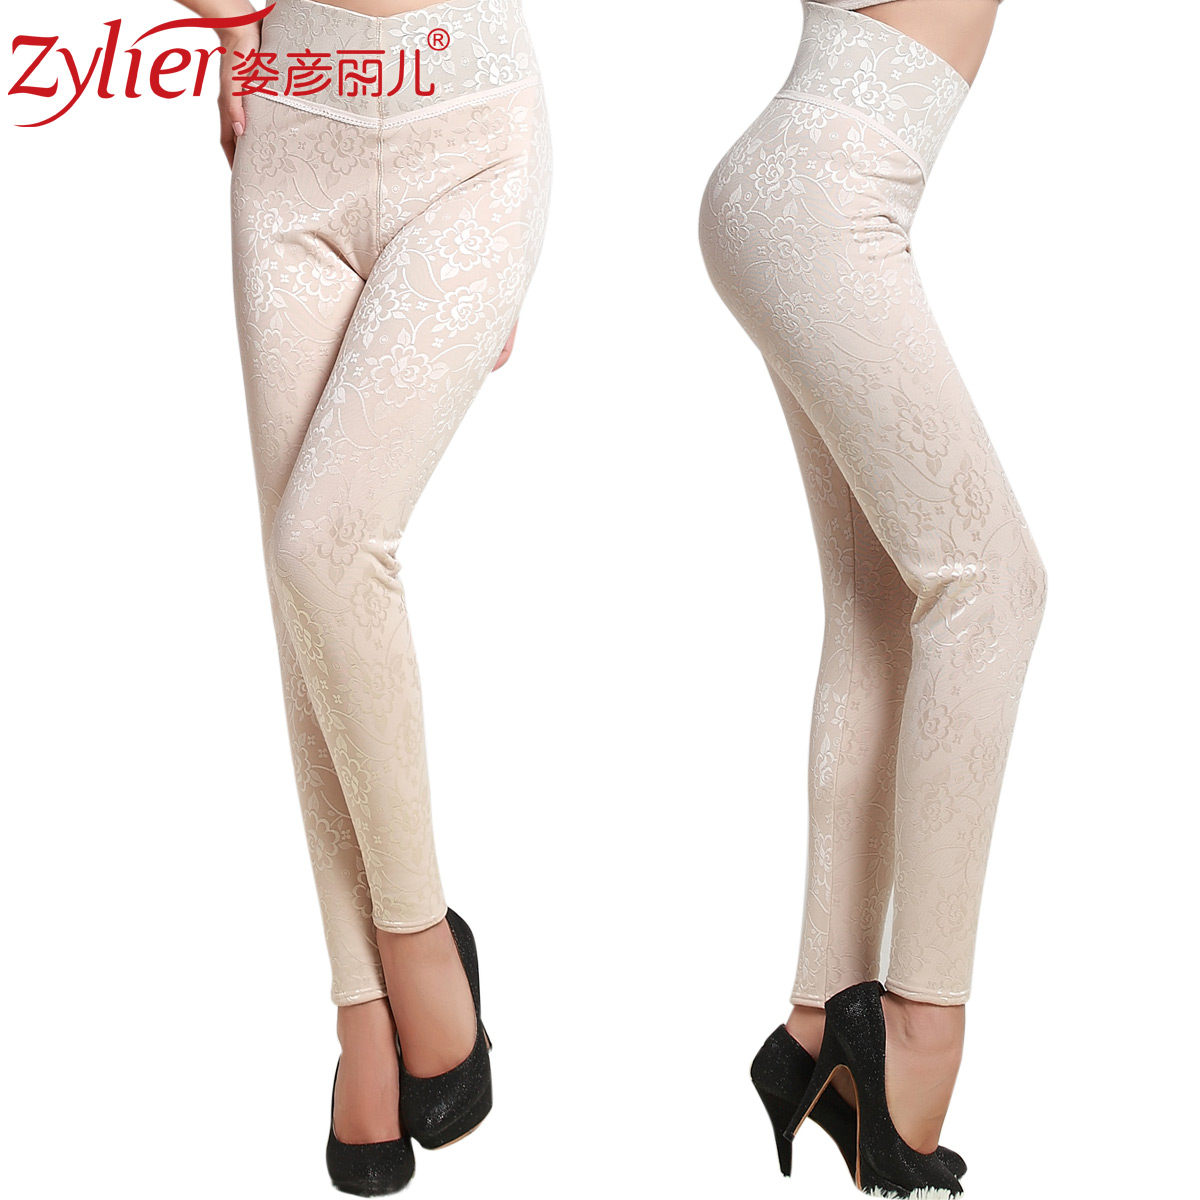 2012 winter new arrival high waist abdomen drawing butt-lifting magnetic therapy body shaping thermal legging bk113